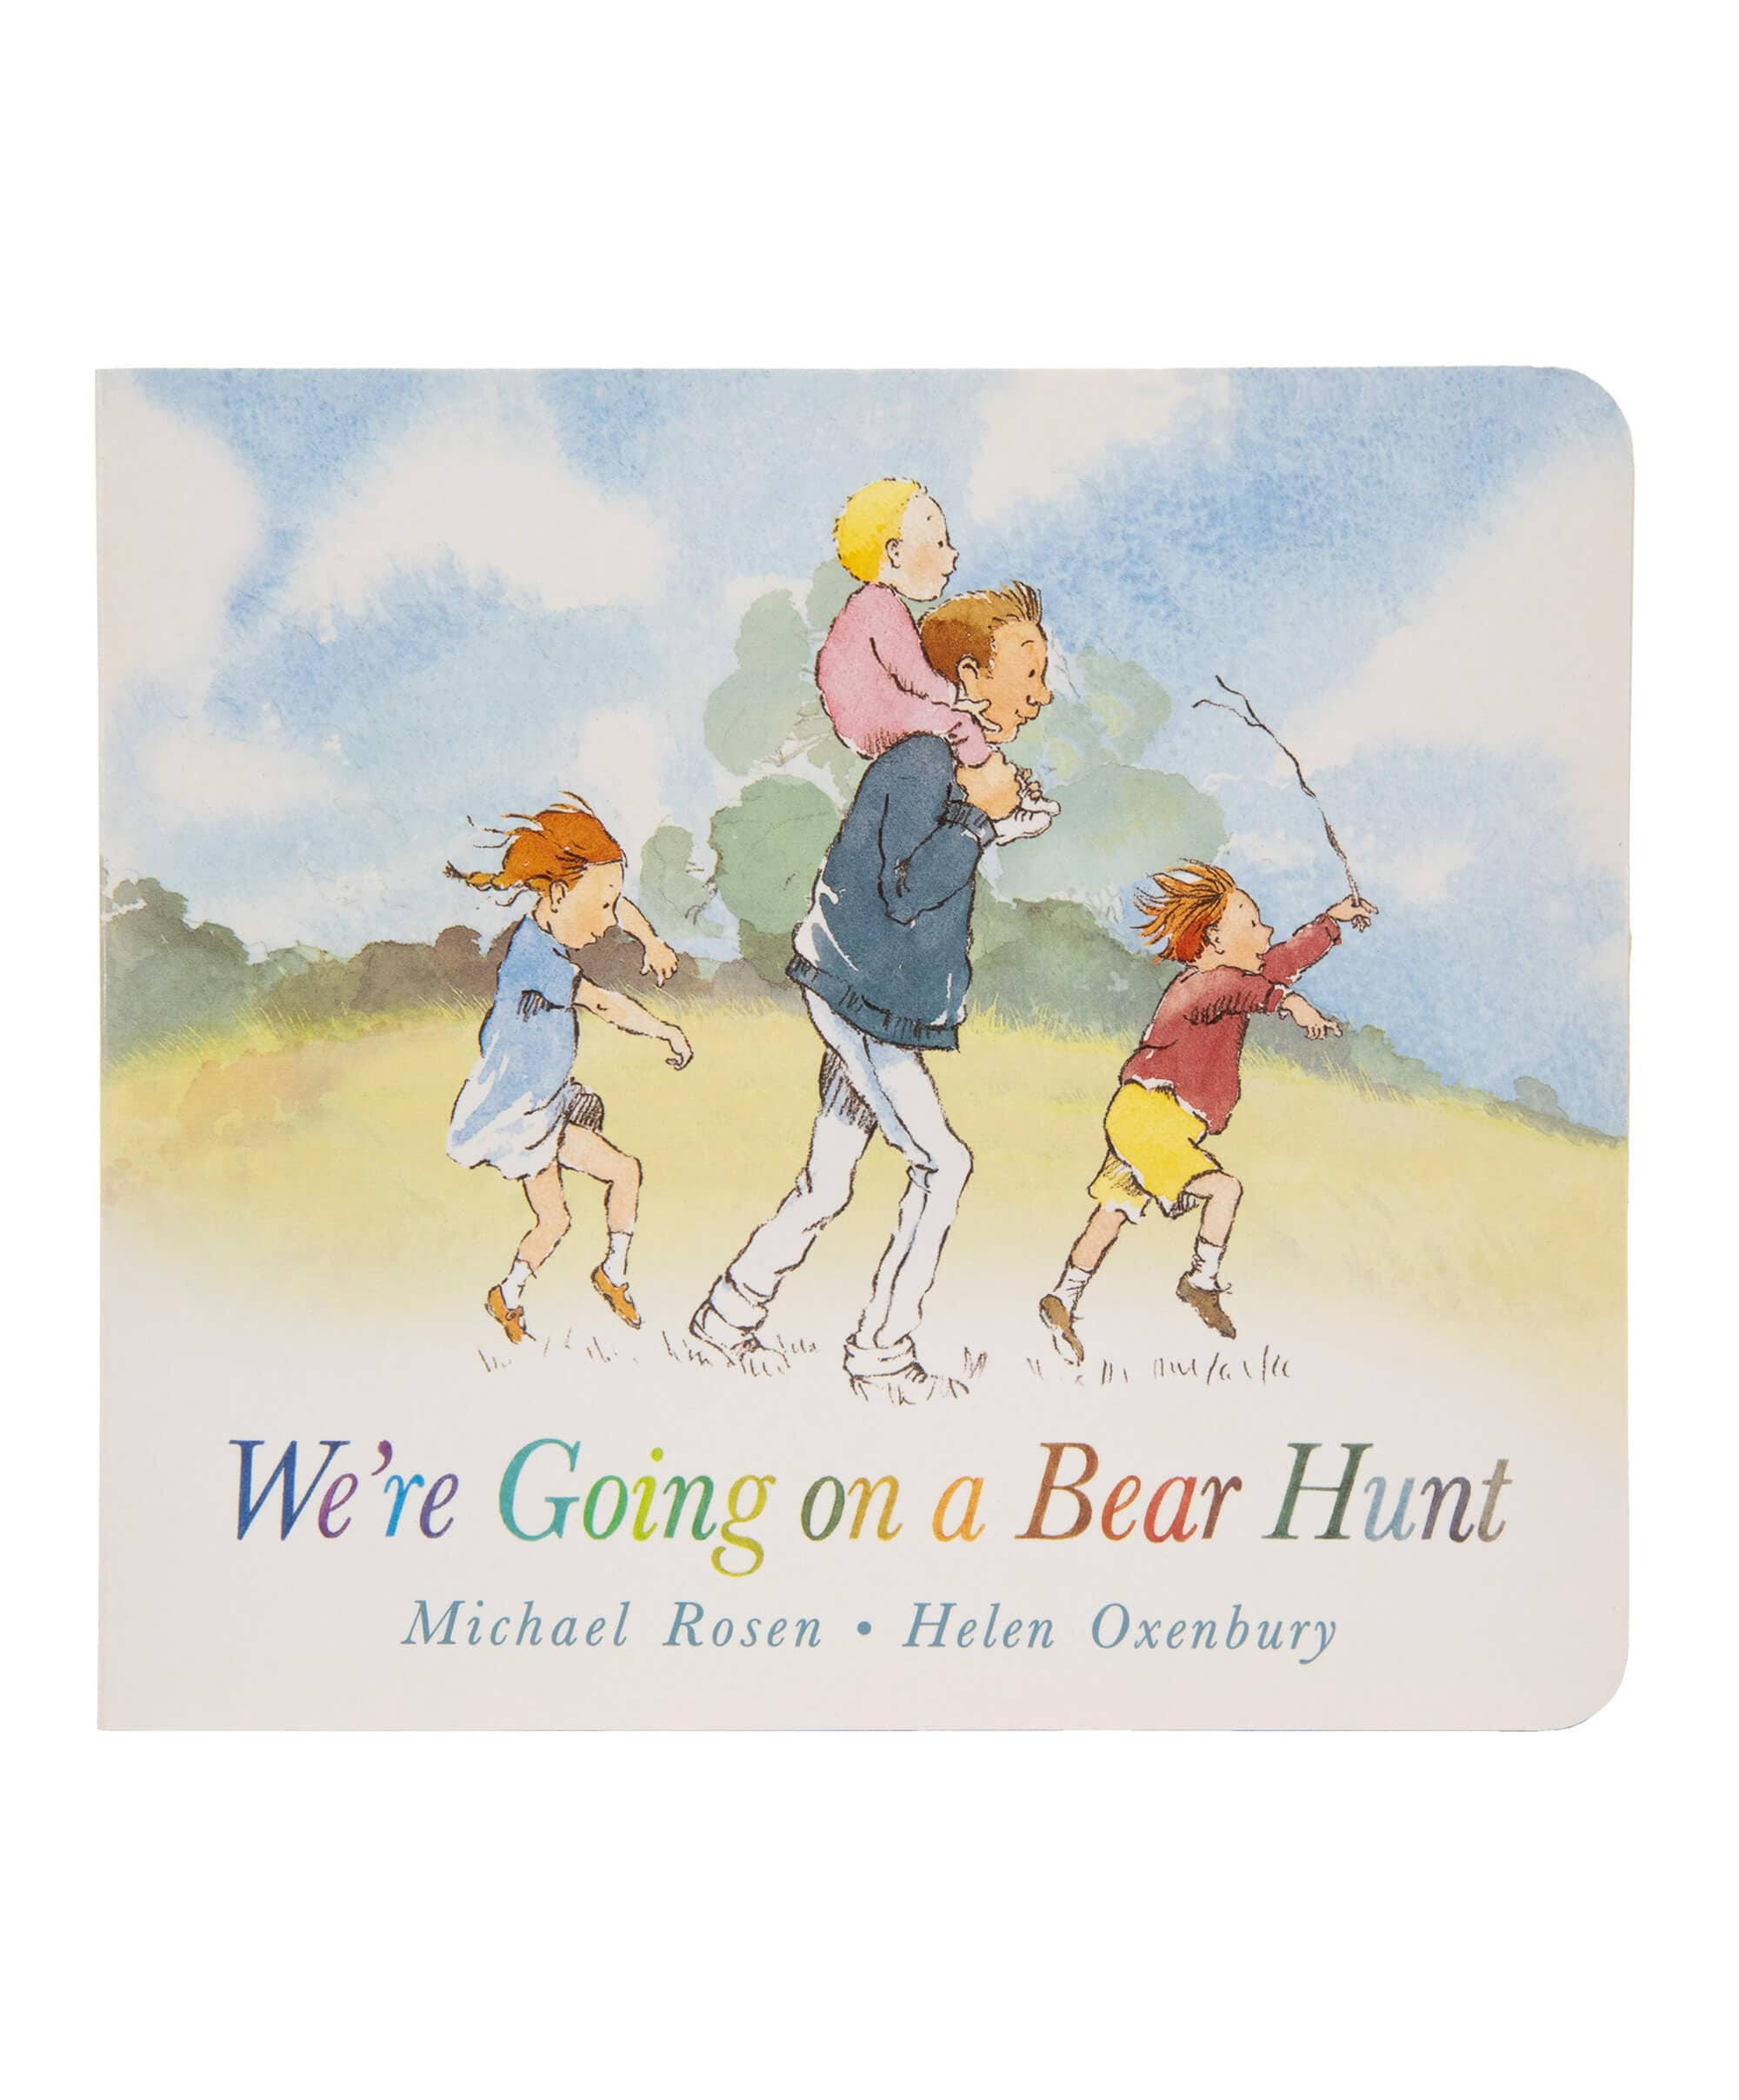 We're Going on a Bear Hunt [Book]